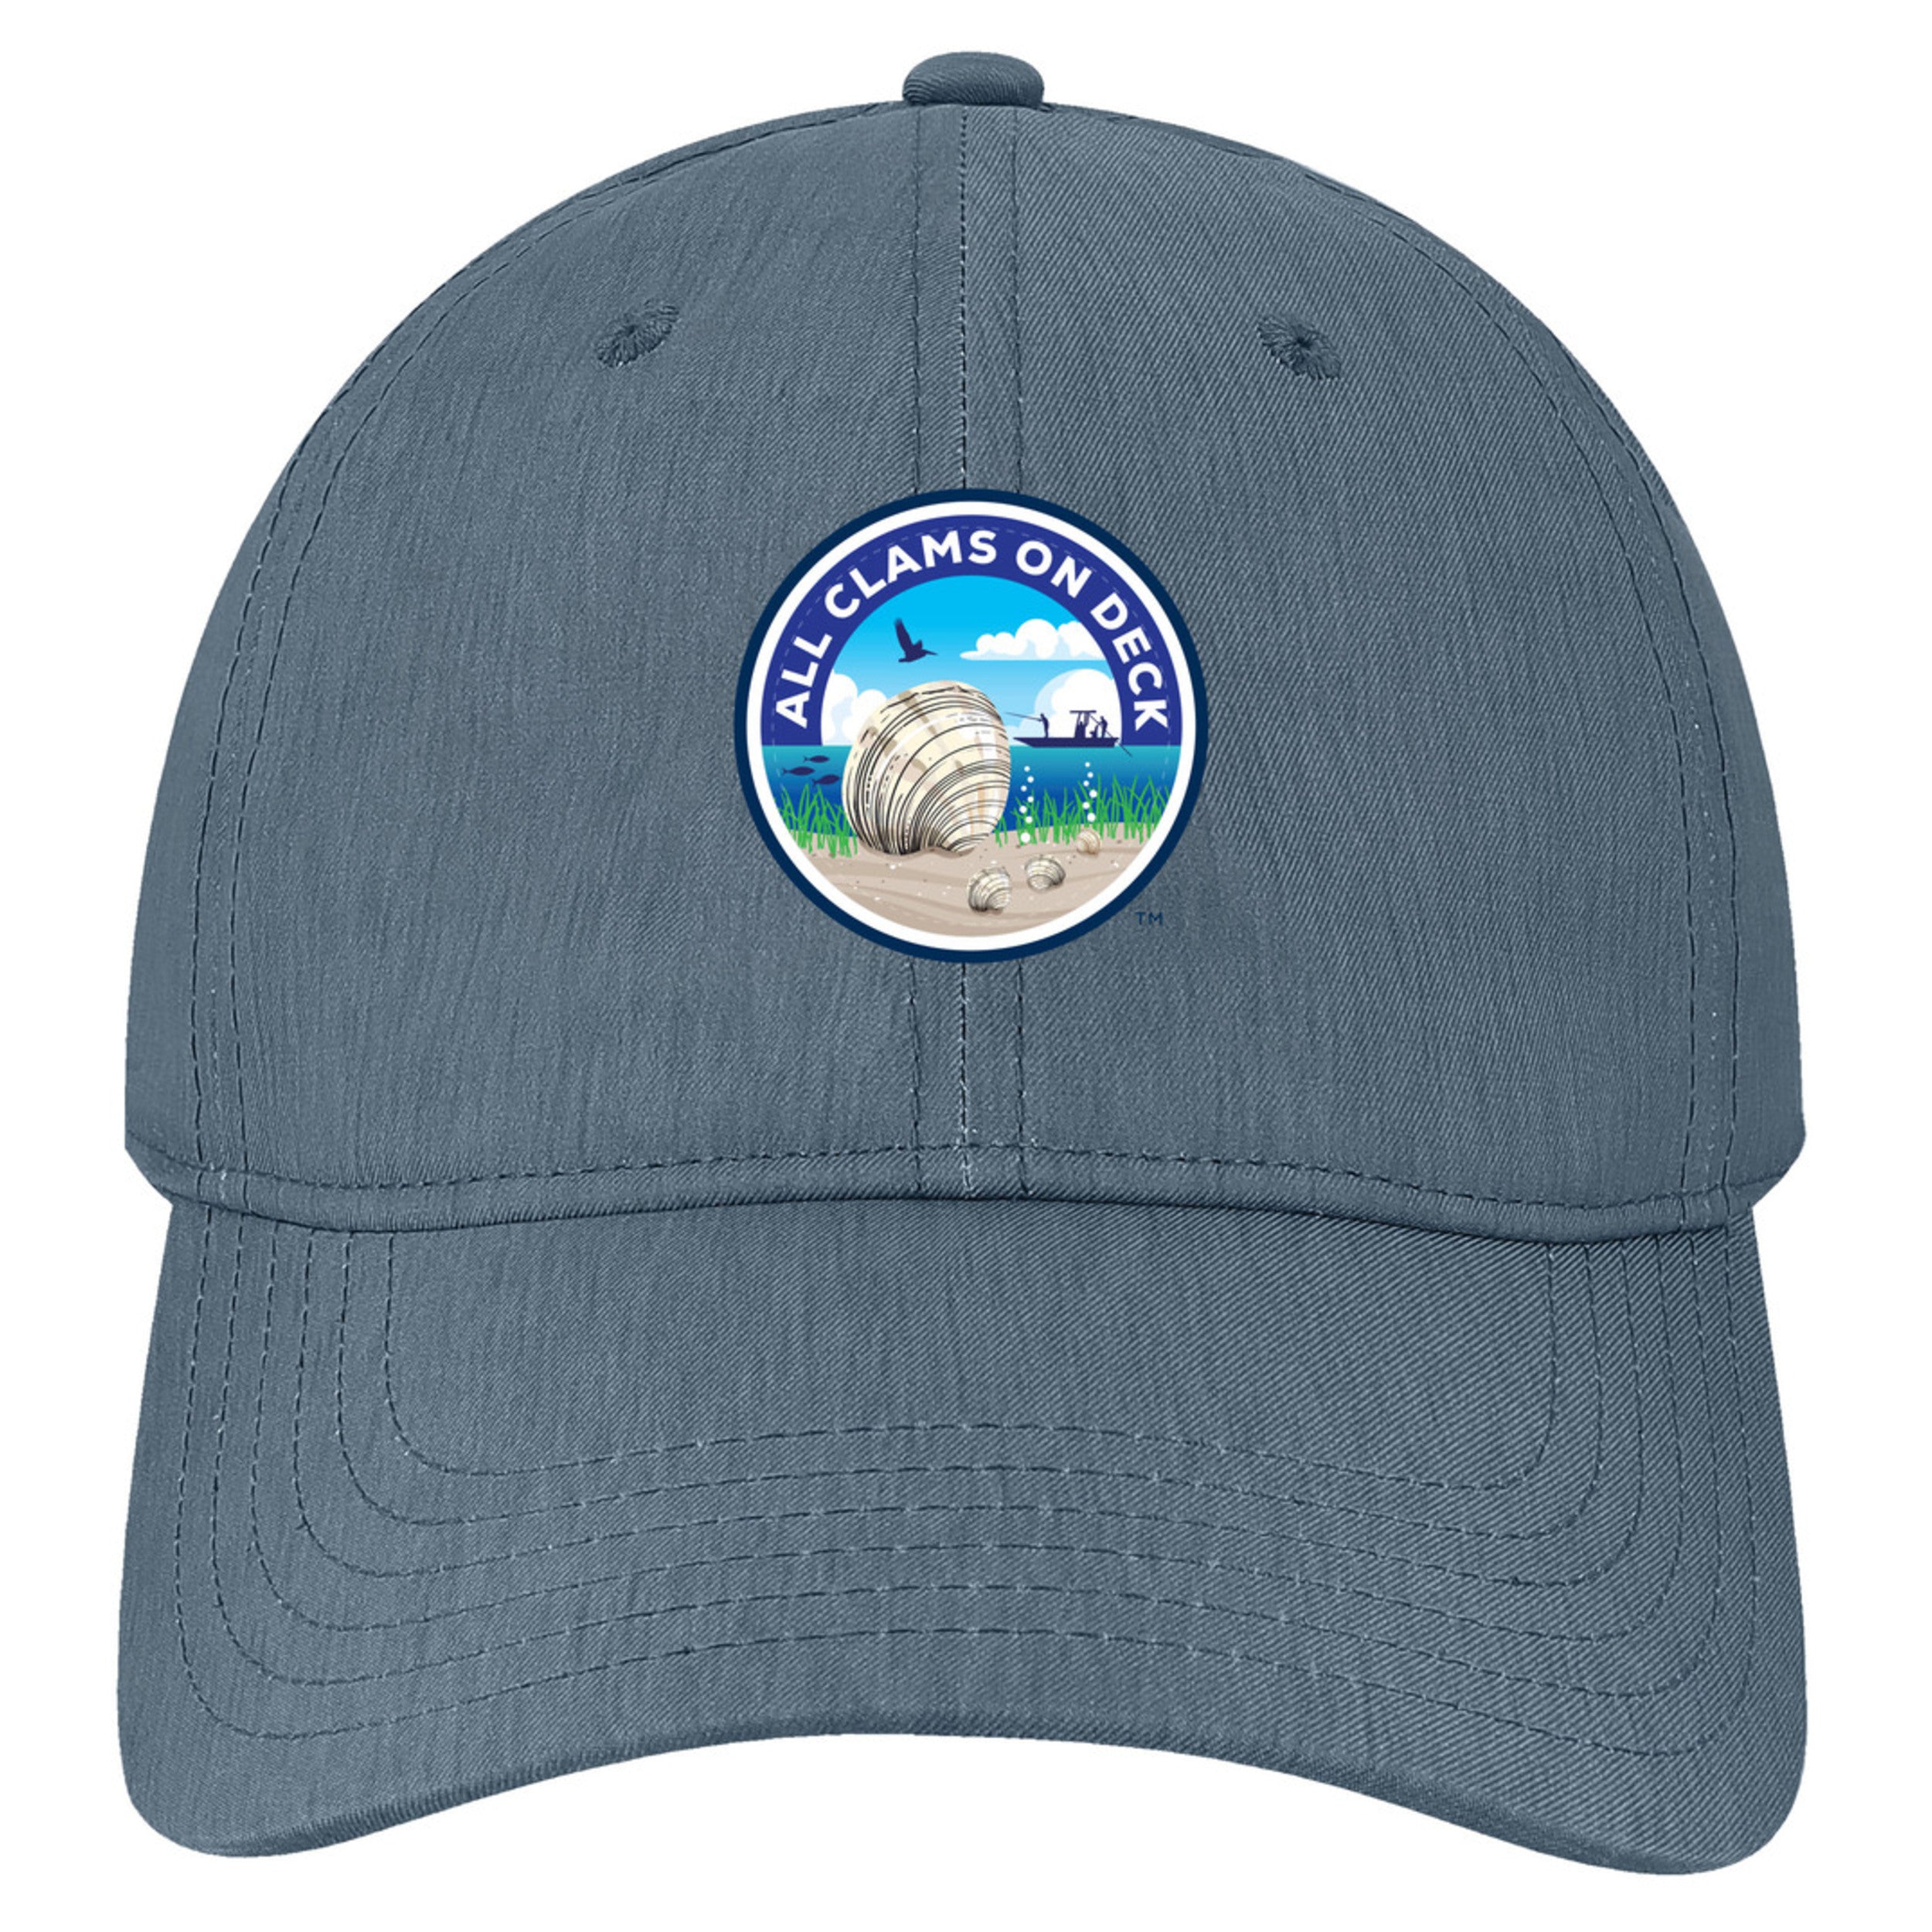 All Clams on Deck Blue Reclaimed Hat – Shop Chiles Hospitality